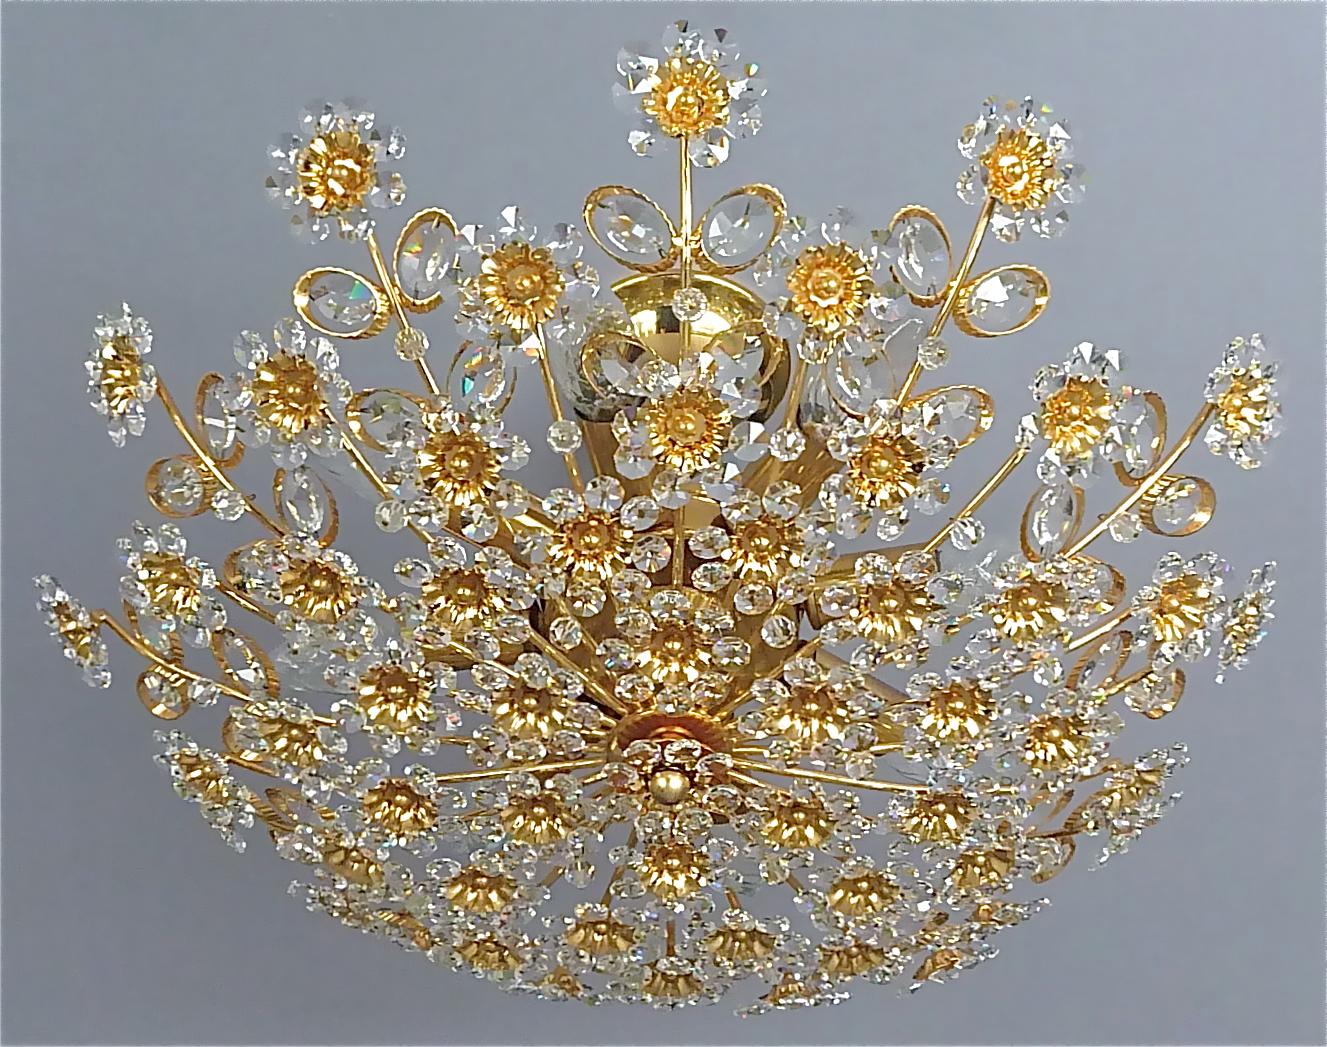 This is no.2 of 3 available.
Large round gilt brass metal crystal glass floral flush mount chandelier made by Palwa, Germany, circa 1960-1970, documented in the Palwa sales catalog, labeled with Palwa company decal with model number. The gorgeous